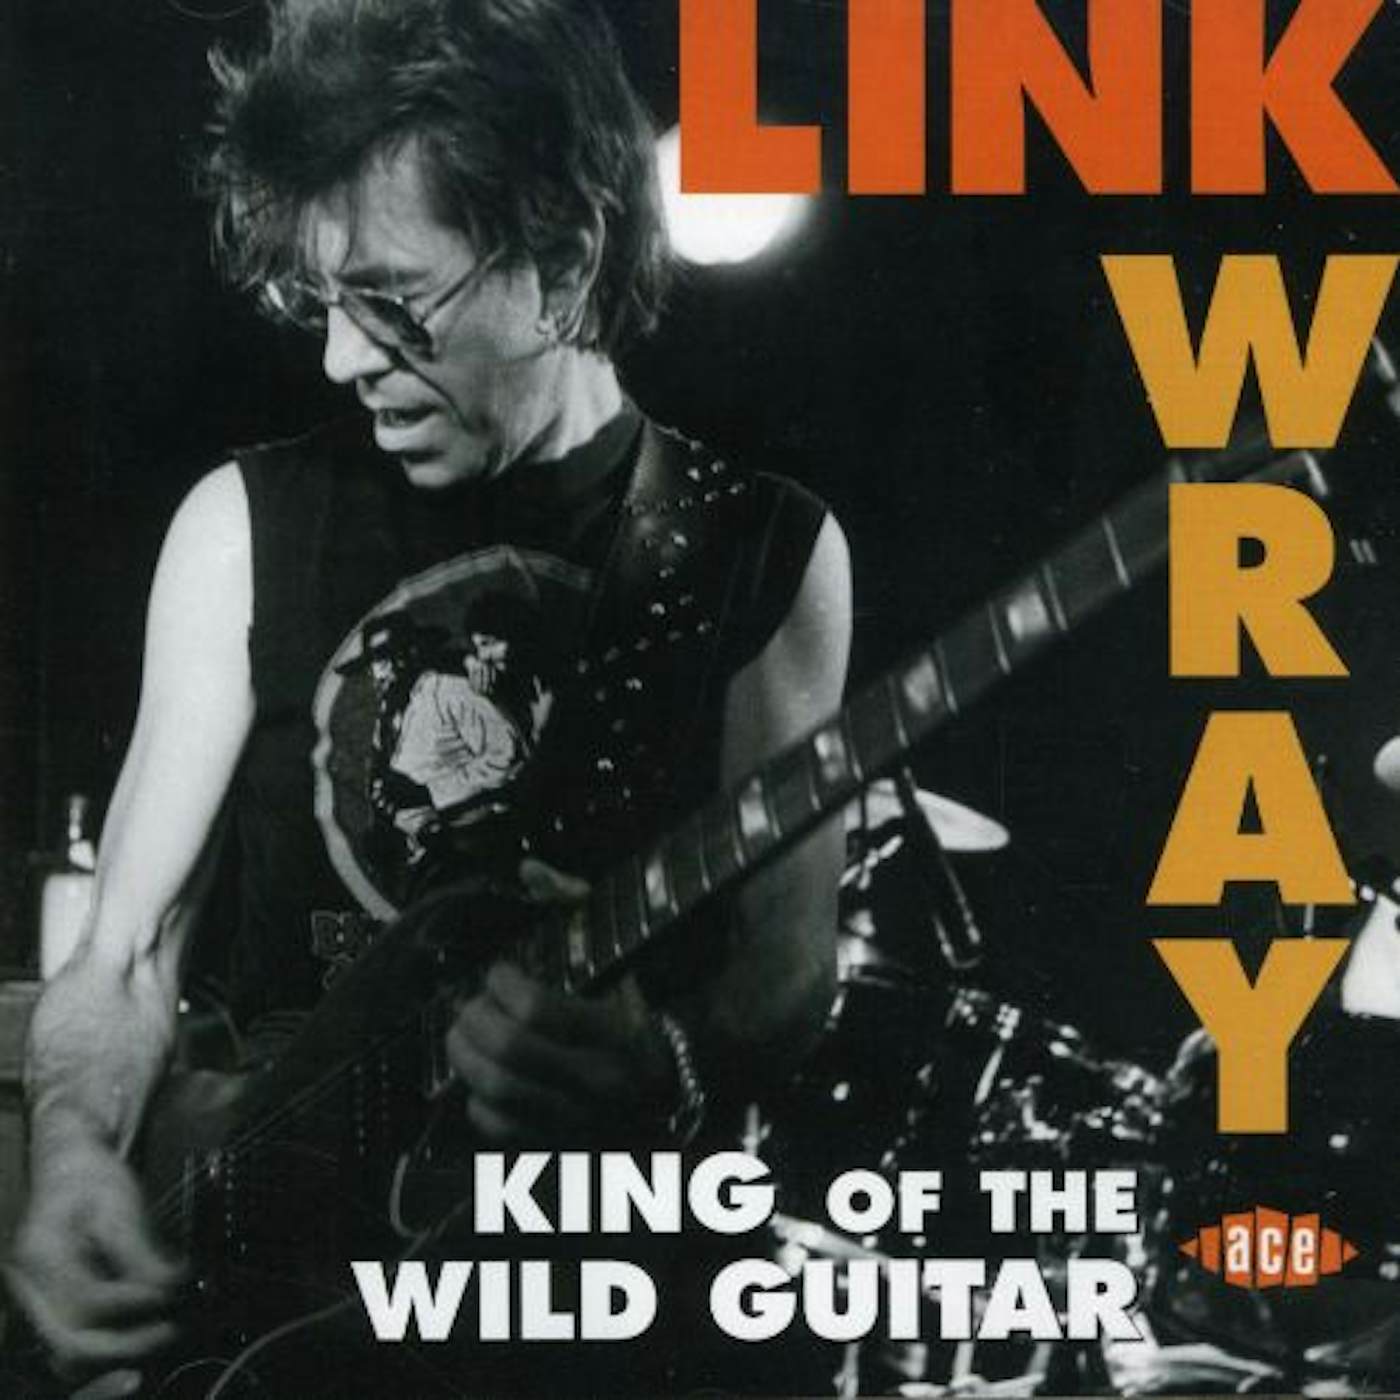 Link Wray KING OF THE WILD GUITAR CD